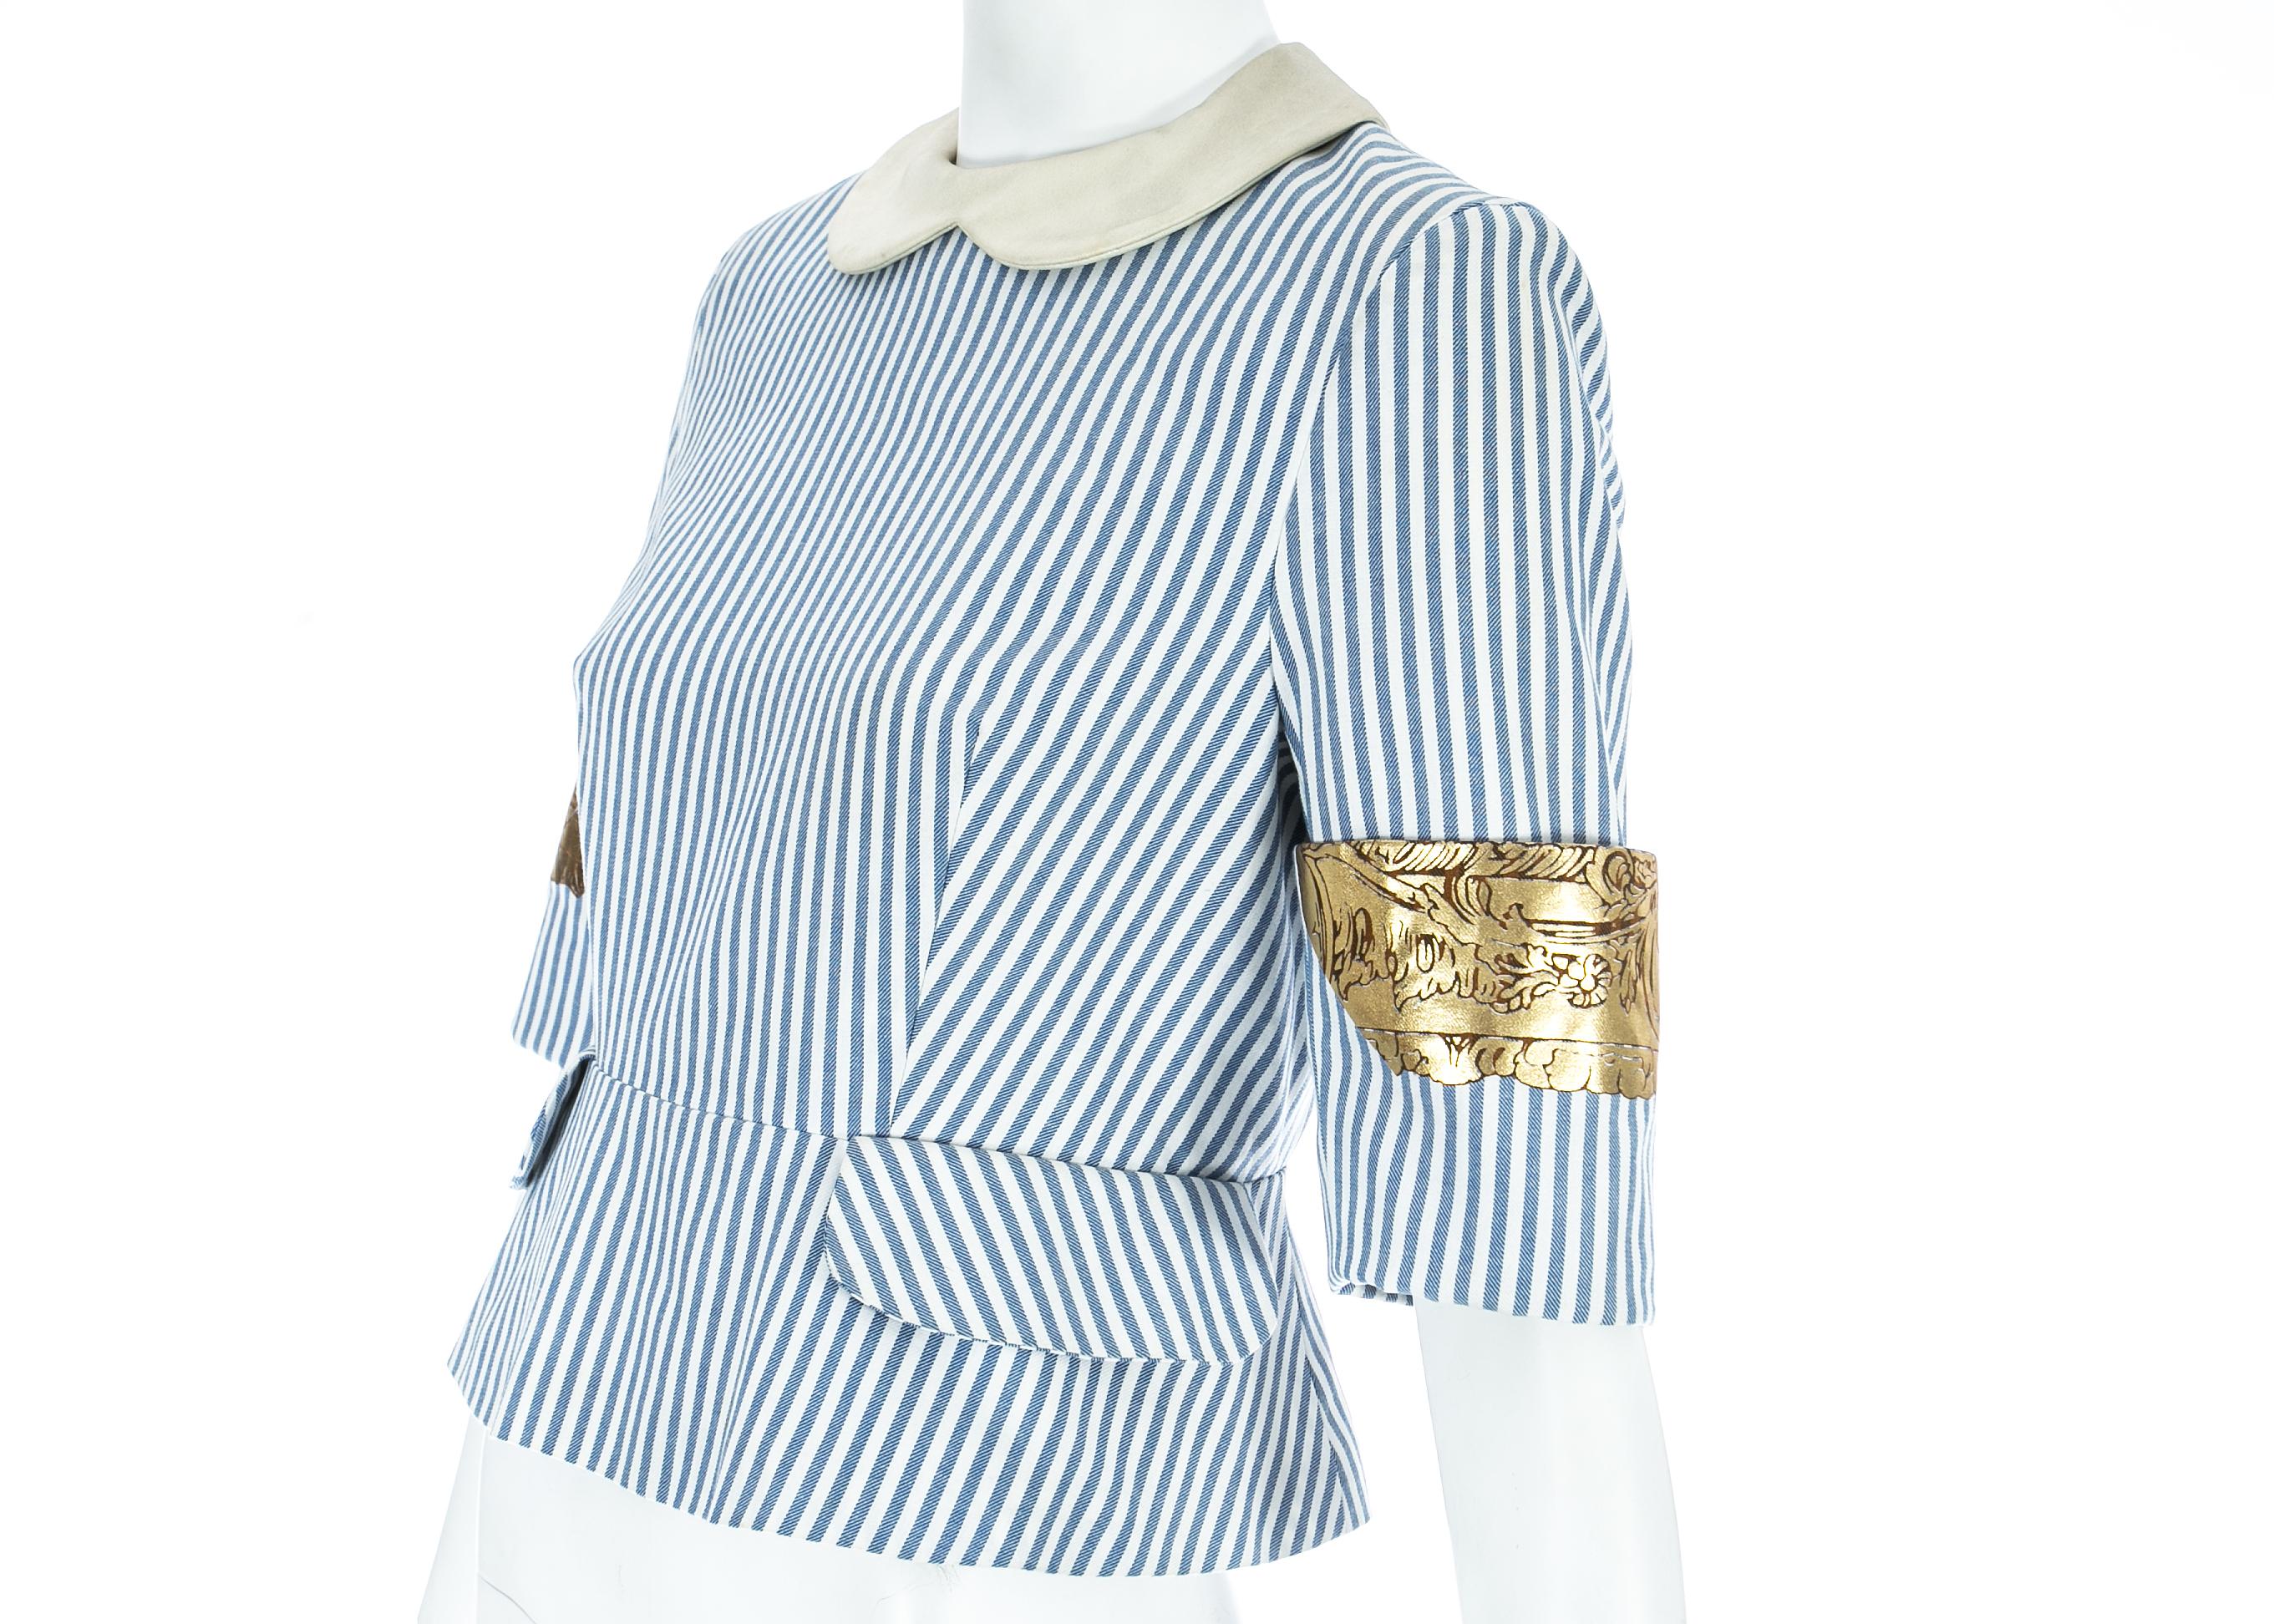 Vivienne Westwood blue and white striped back to front blouse with metallic gold motifs on the cuffs

Spring-Summer 1989